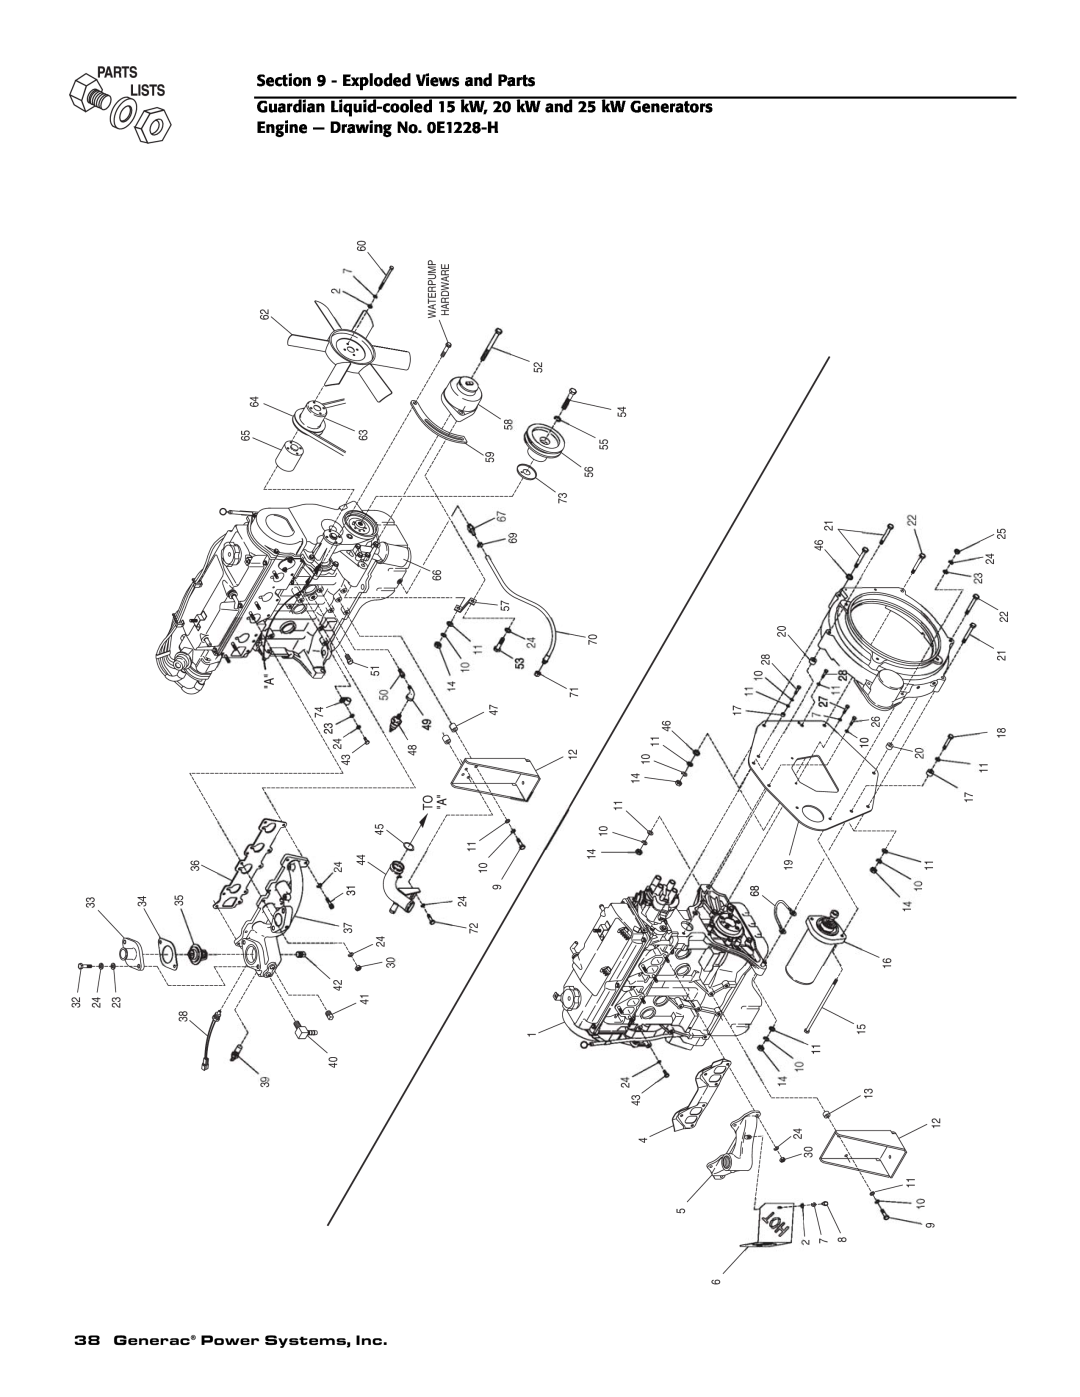 Guardian Technologies 004722-0, 004725-3, 004723-0 Exploded Views and Parts, Generac Power Systems, Inc, Waterpump Hardware 